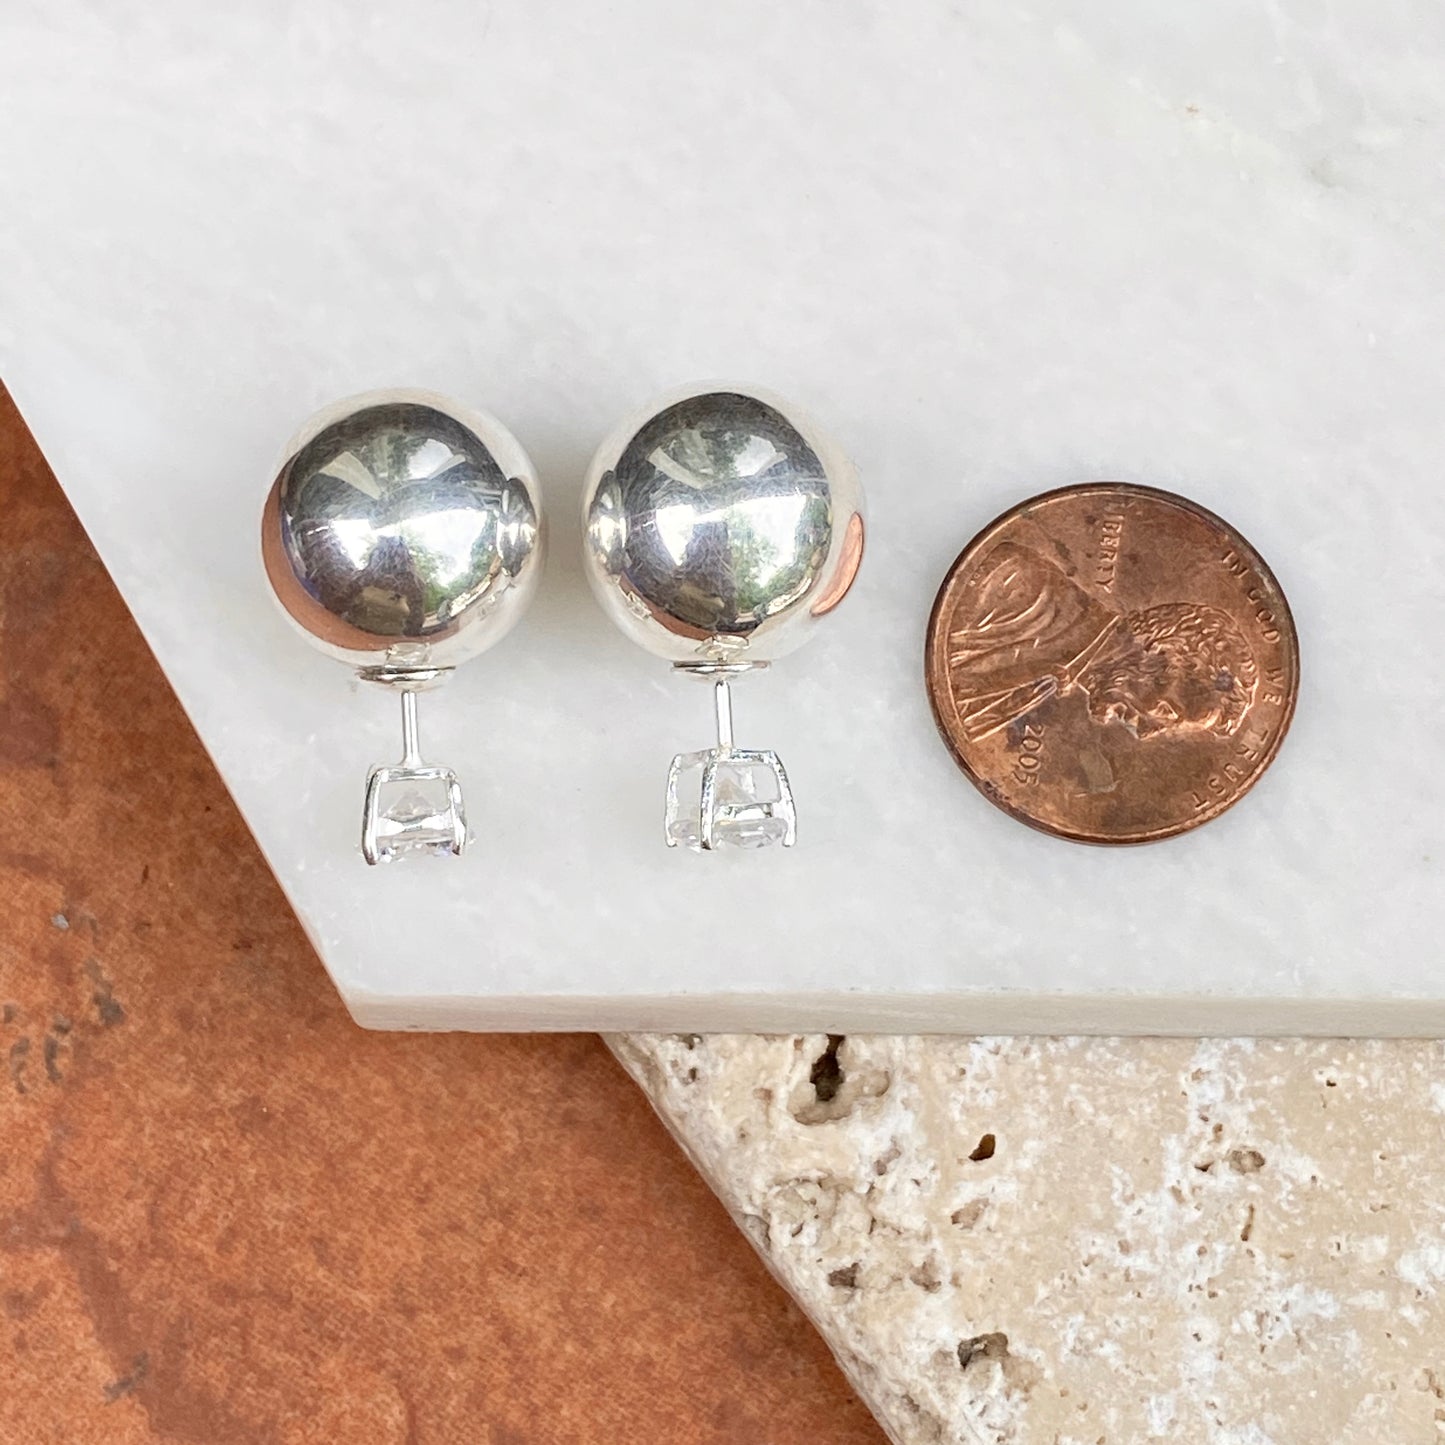 Sterling Silver Double-Ended Polished Ball + CZ Stud Post Earrings, Sterling Silver Double-Ended Polished Ball + CZ Stud Post Earrings - Legacy Saint Jewelry